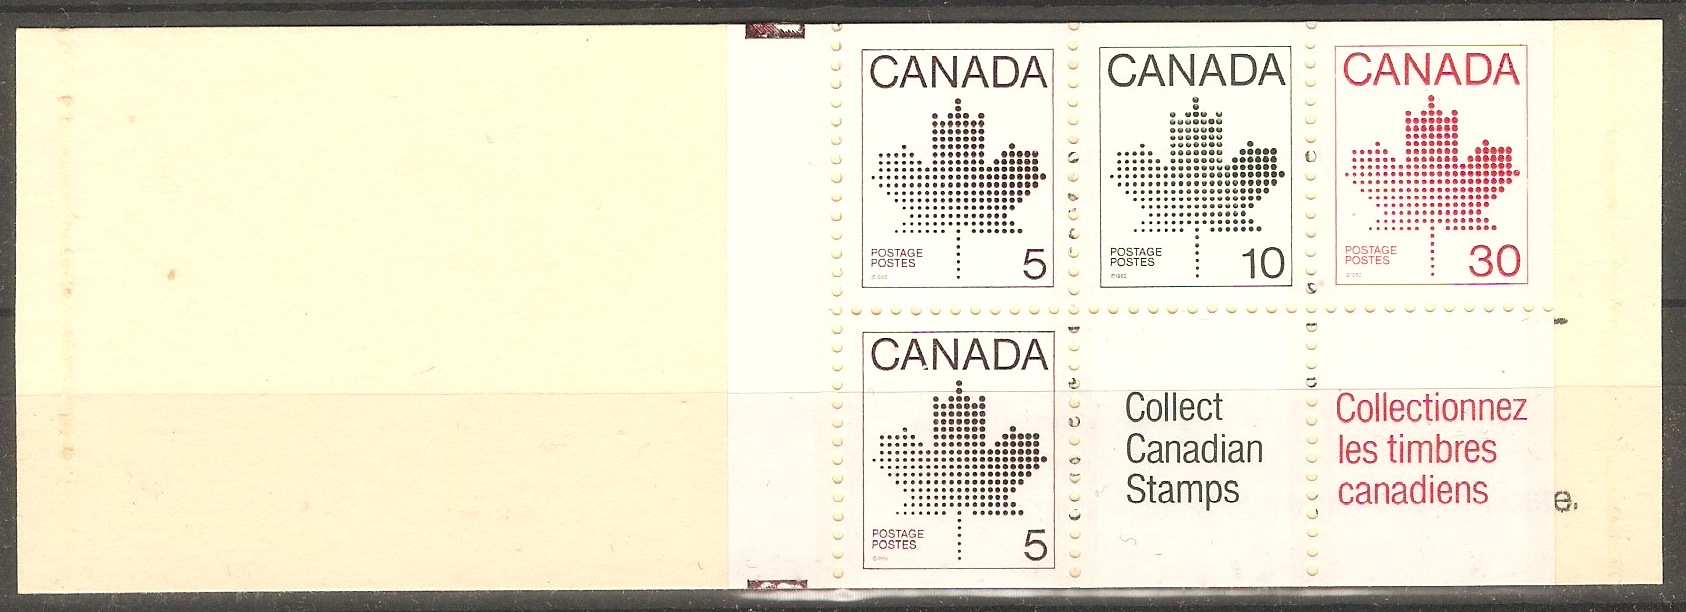 Canada 1982 Stamp booklet. SG1033a.